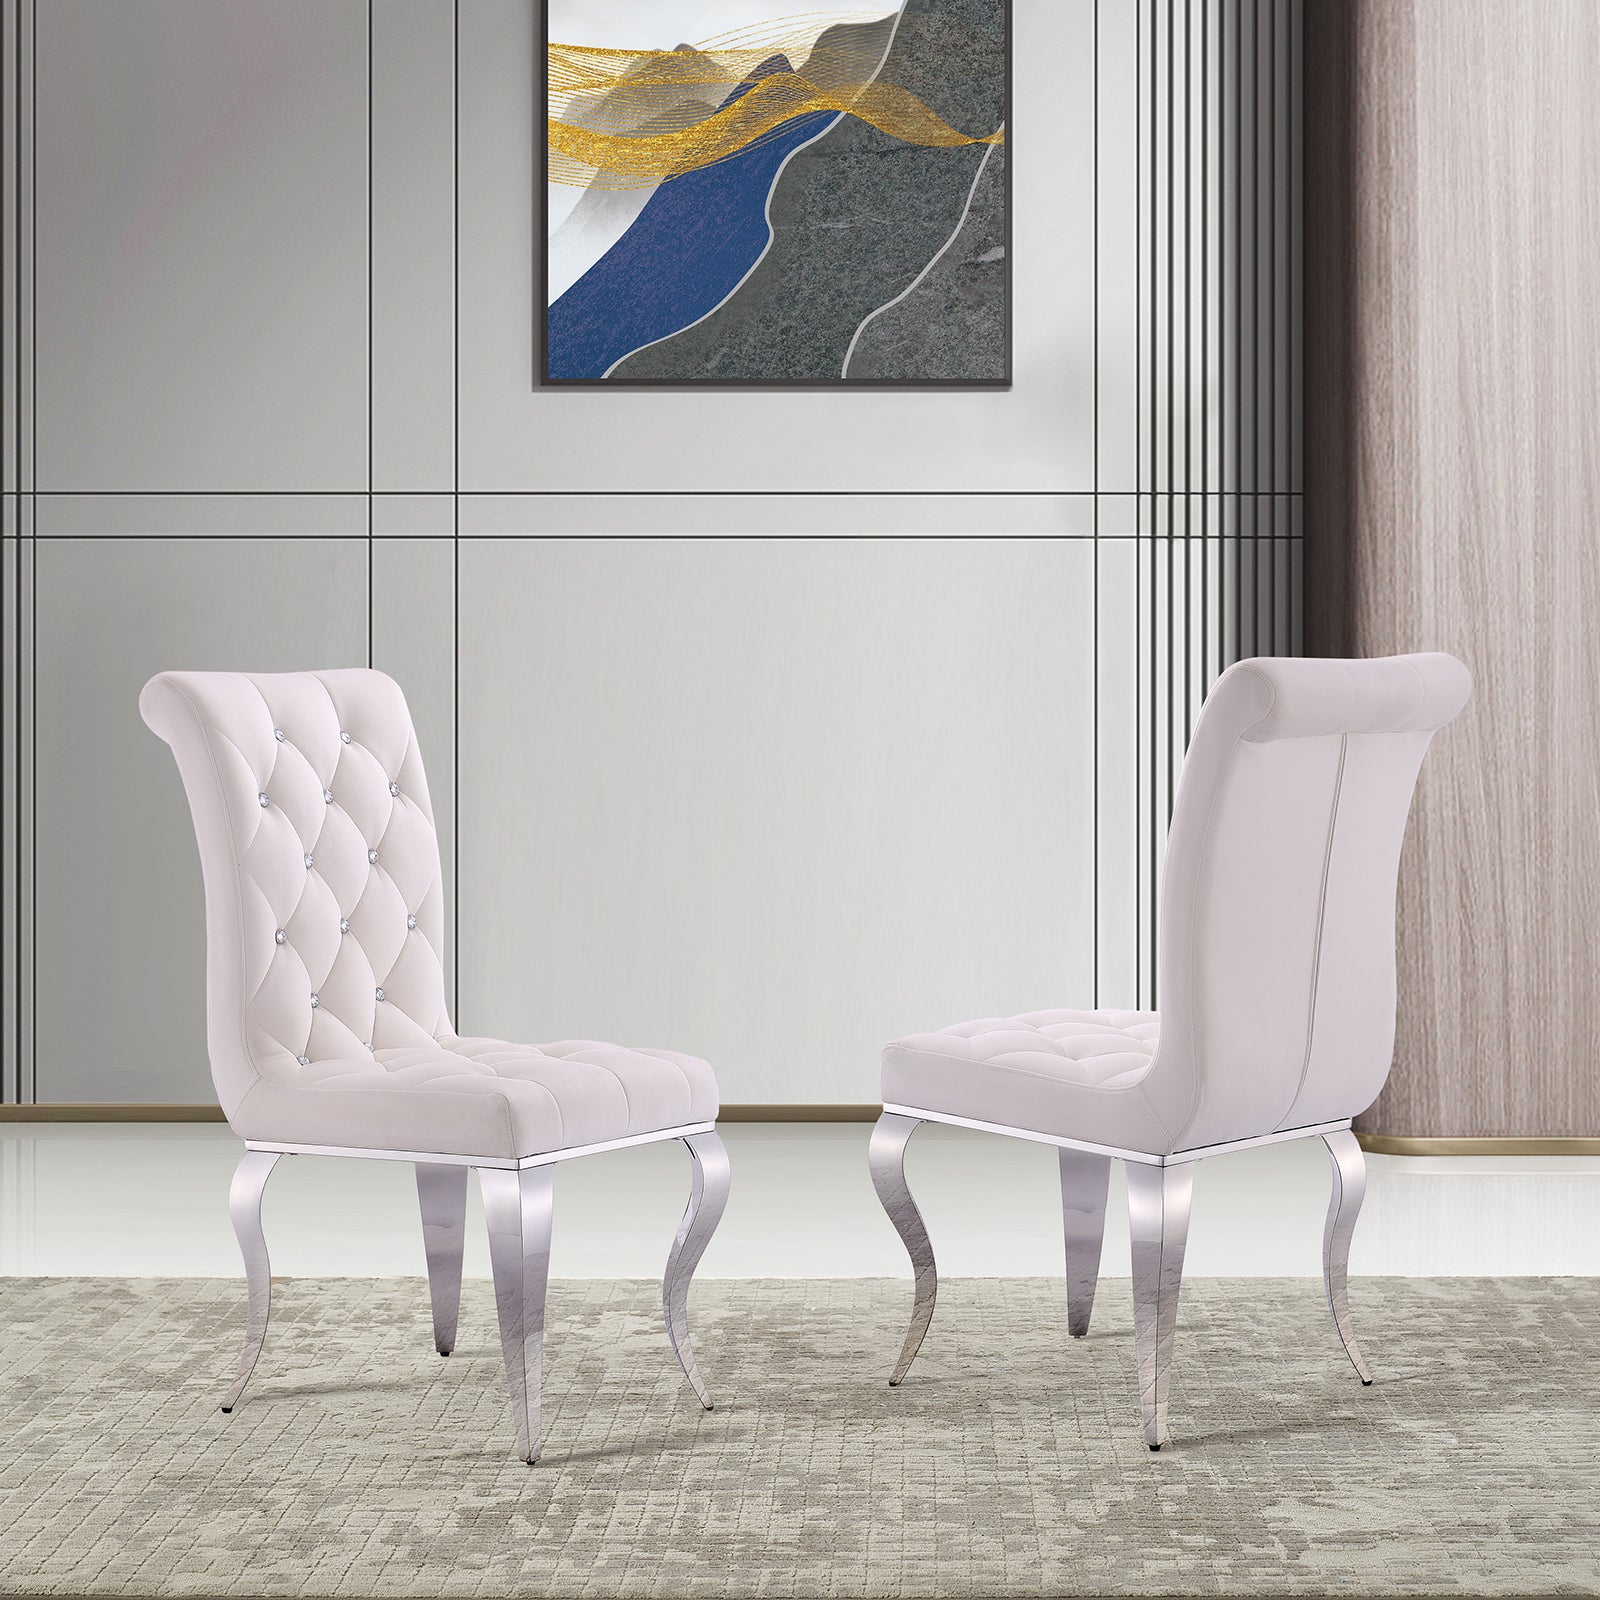 Title: Elevate Your Dining Experience with Stylish White Dining Chairs